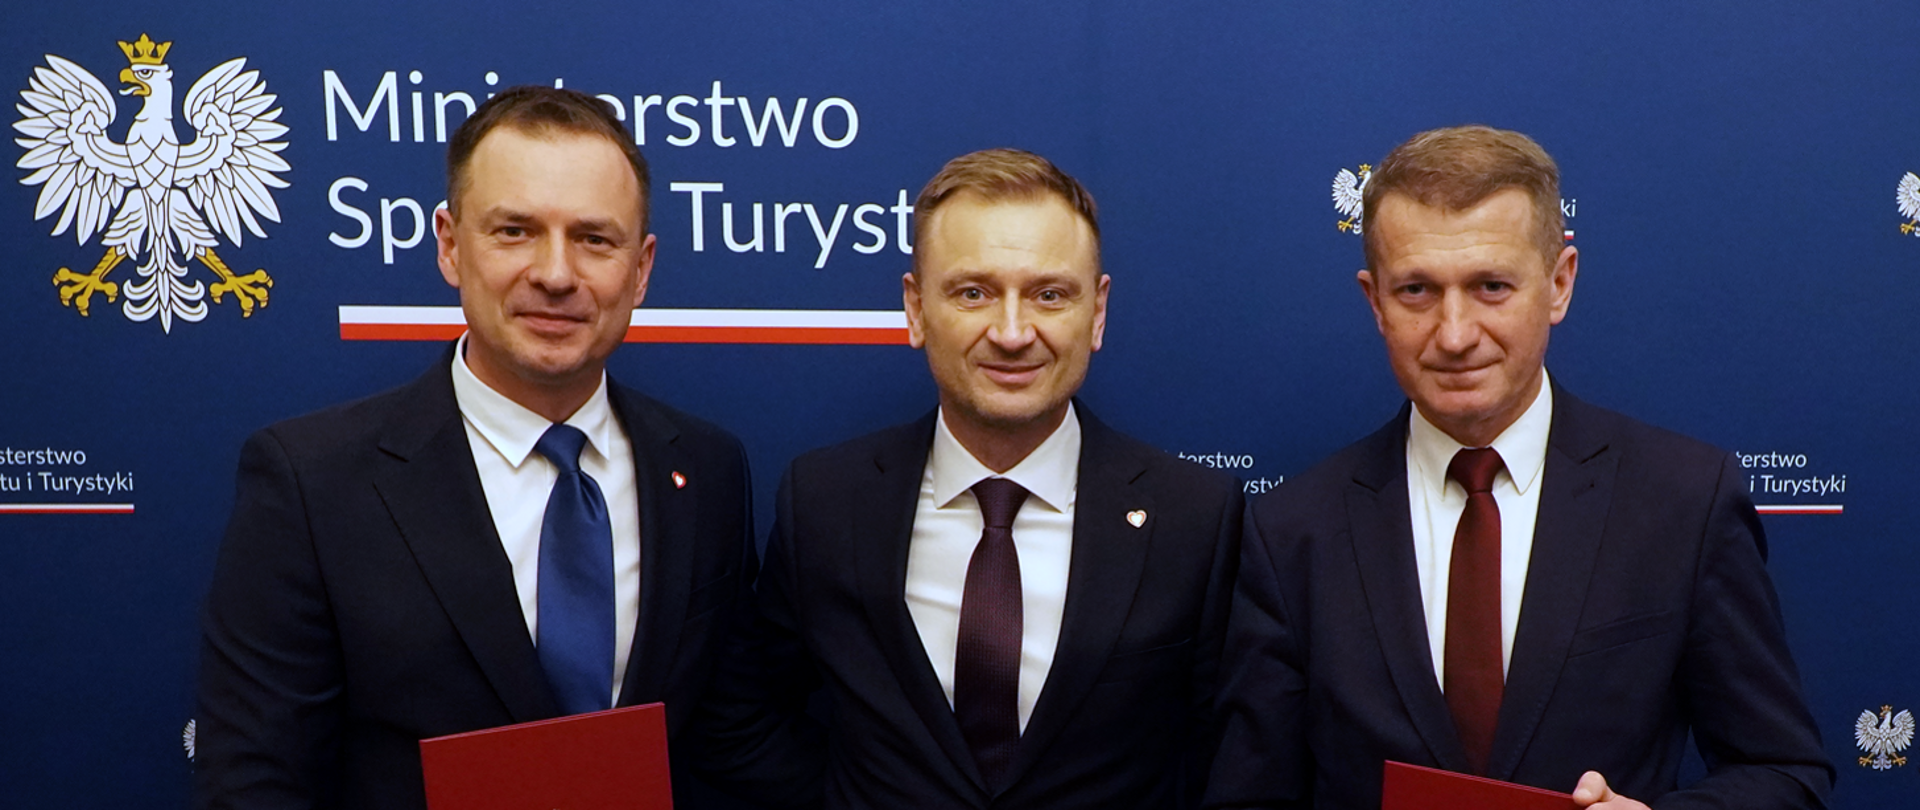 three men in suits standing with the Ministry of Sport and Tourism banner in the background